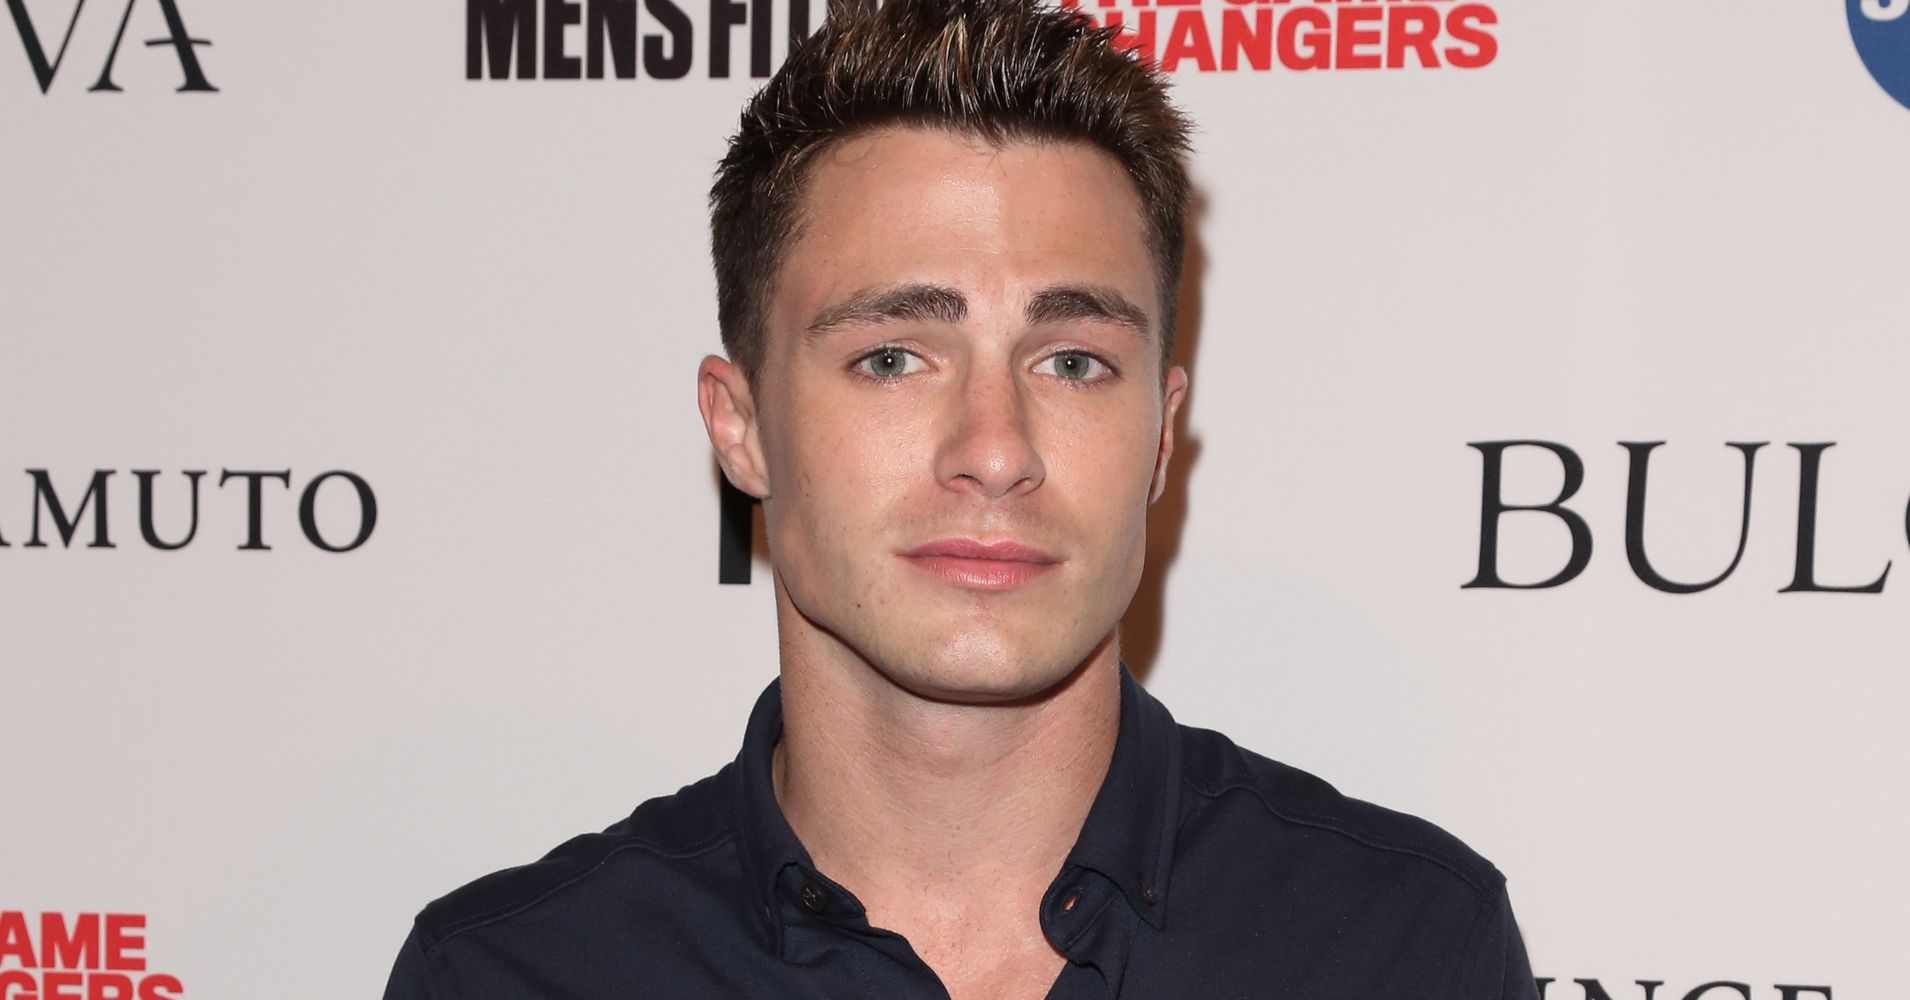 Heres How Colton Haynes Responded To Claims About His Sexuality Huffpost